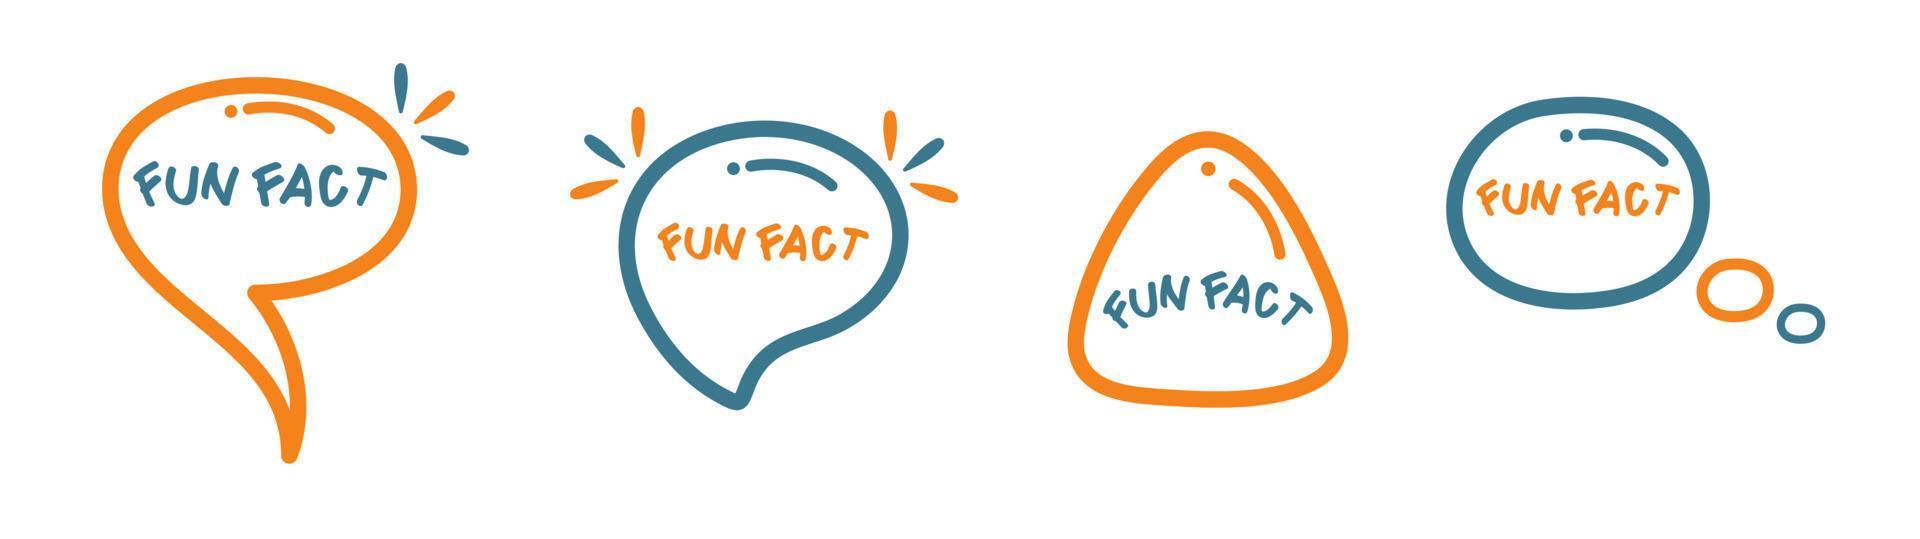 Fun facts icon with lines. Vector cartoon speech bubble with text in different shapes.